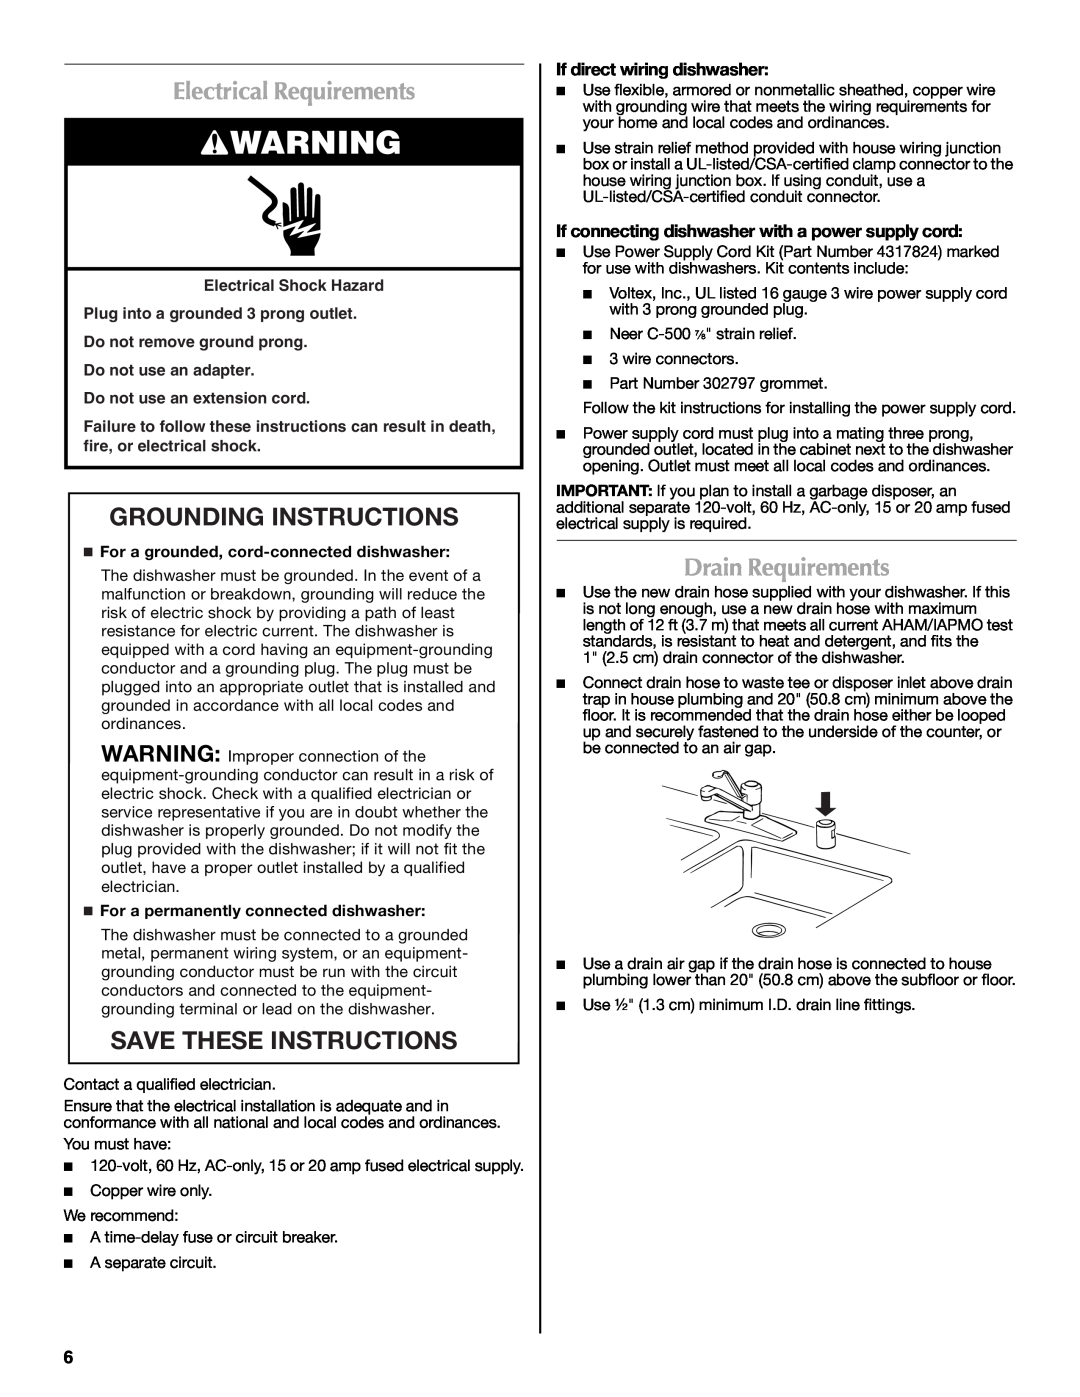 Maytag W10300218A Electrical Requirements, Grounding Instructions, Save These Instructions, Drain Requirements 